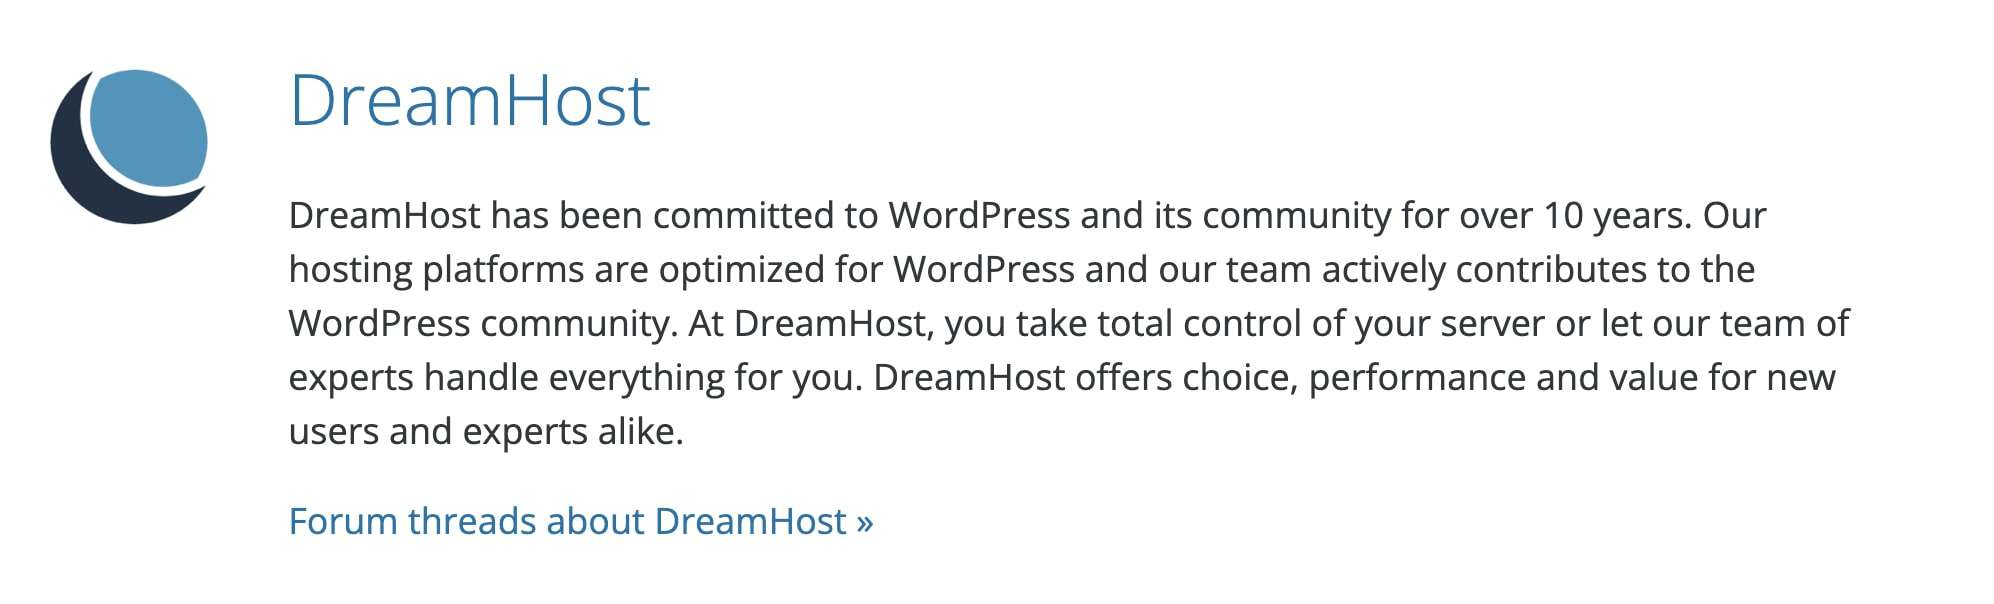 WordPress lists DreamHost as one of its preferred hosting providers.